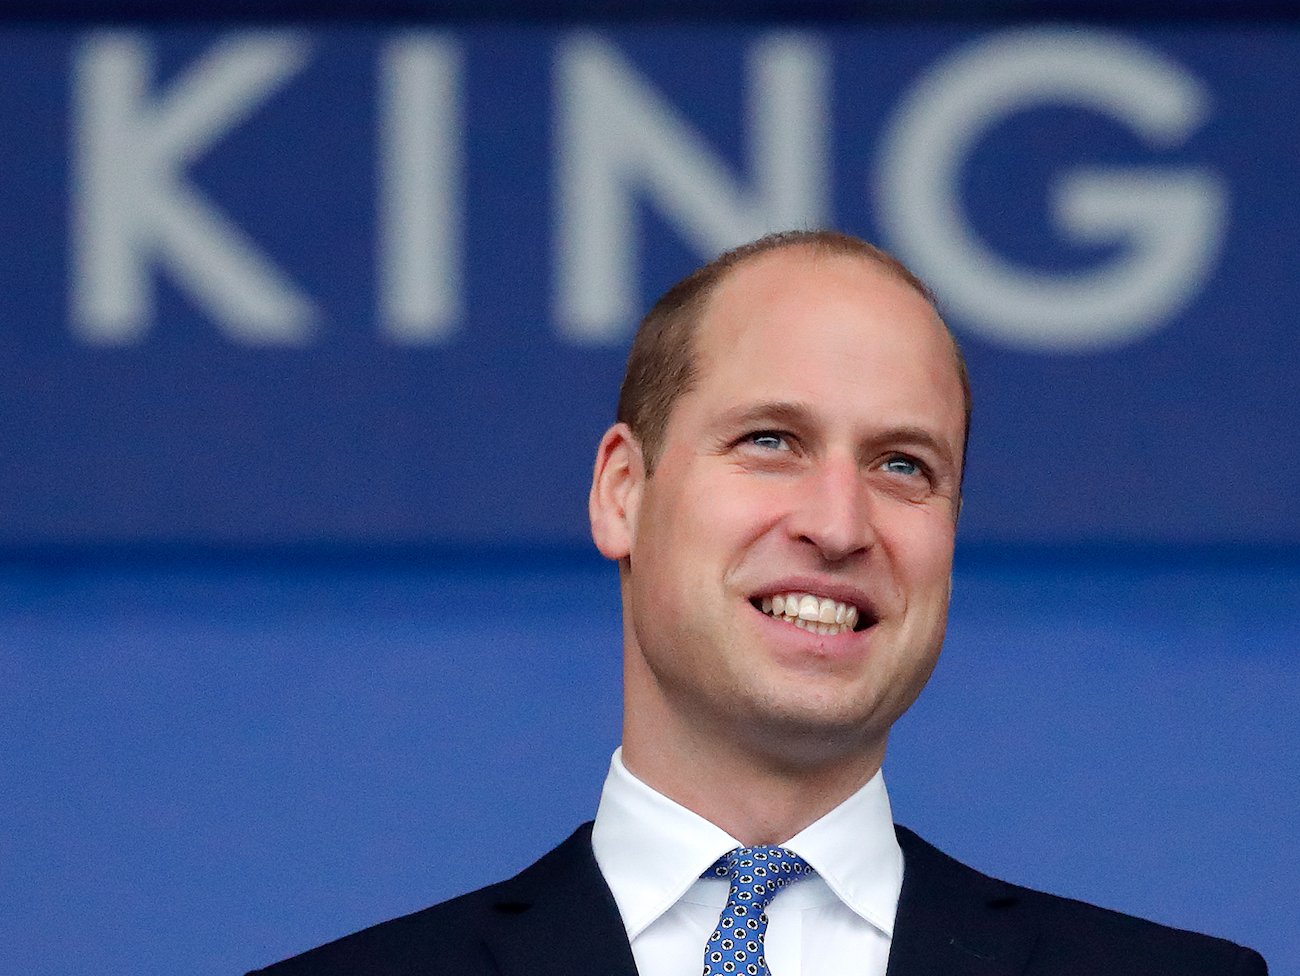 Prince William wearing a suit and smiling, seen from below